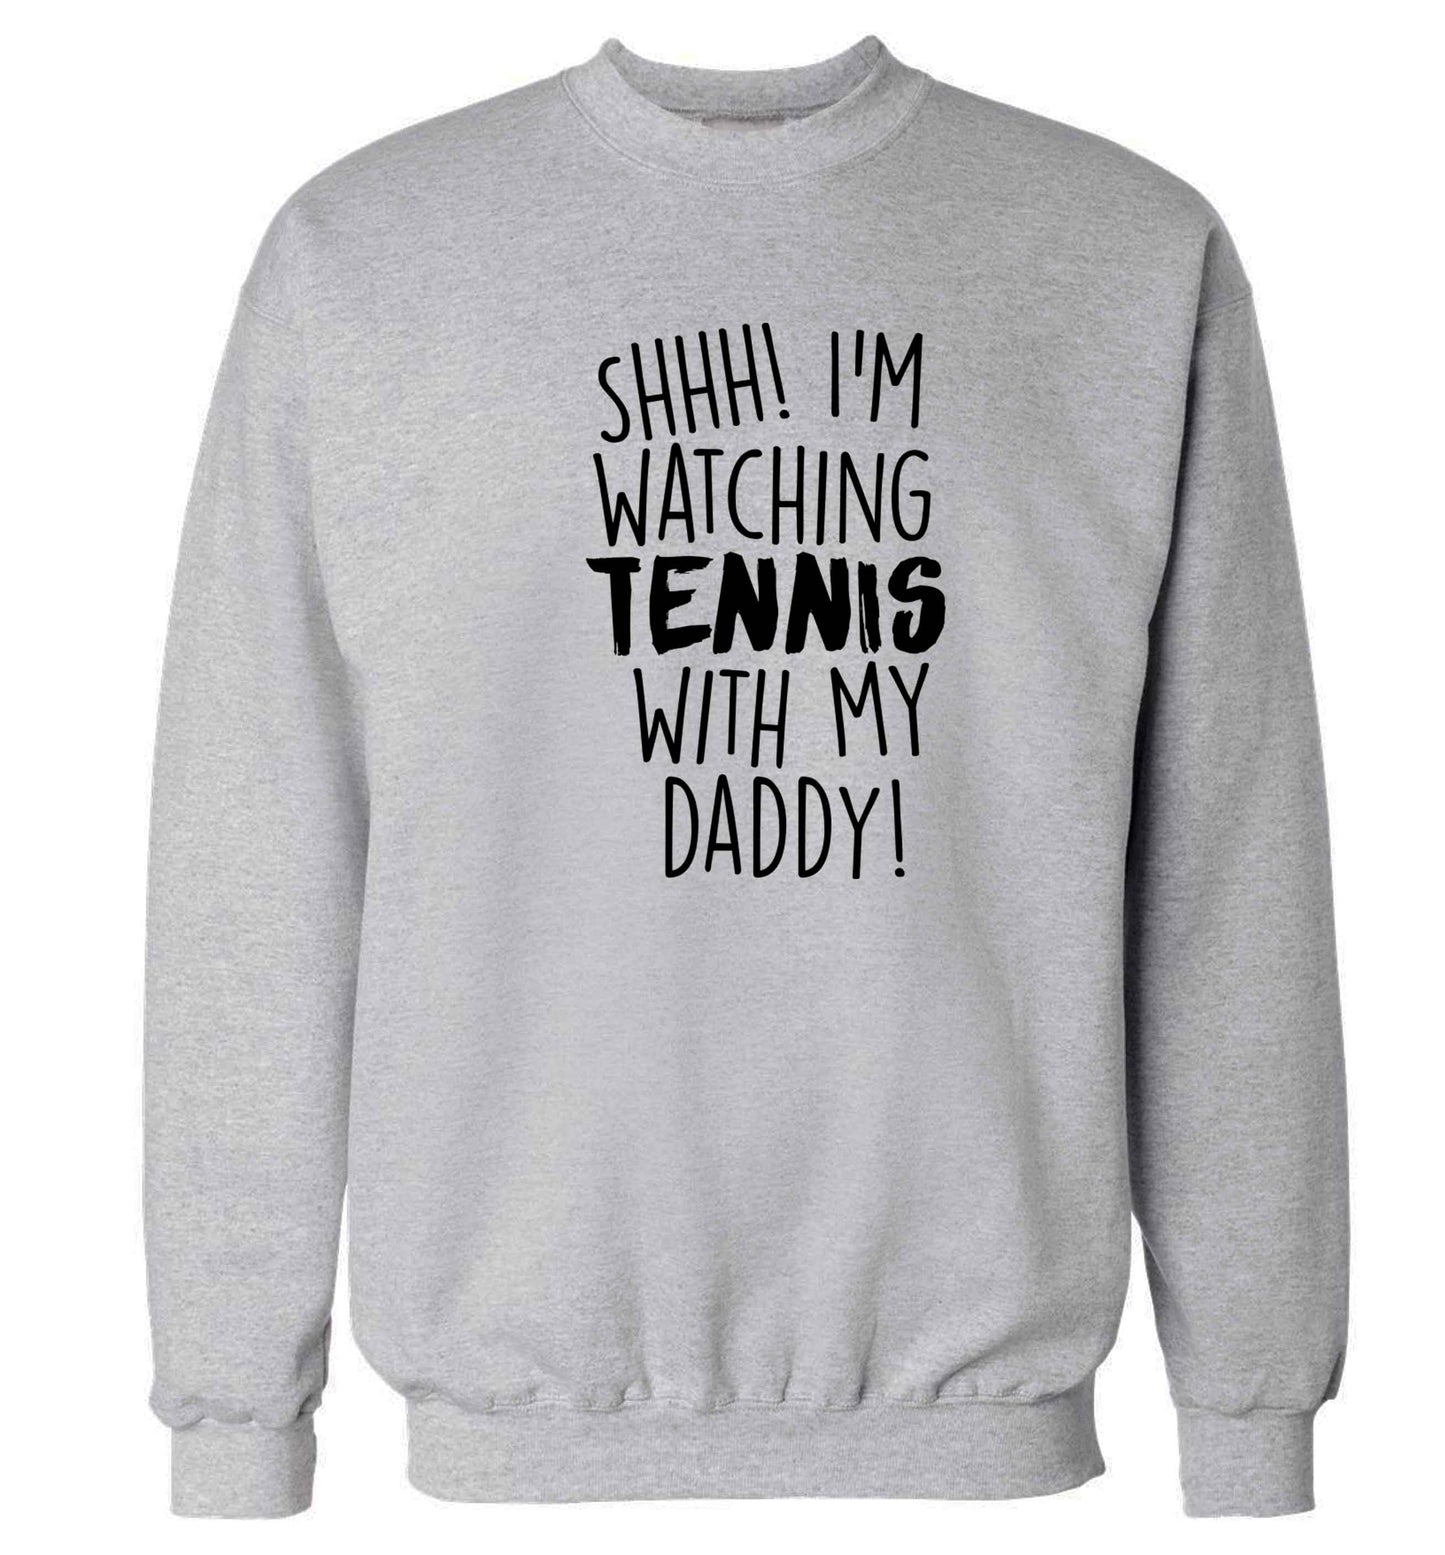 Shh! I'm watching tennis with my daddy! Adult's unisex grey Sweater 2XL